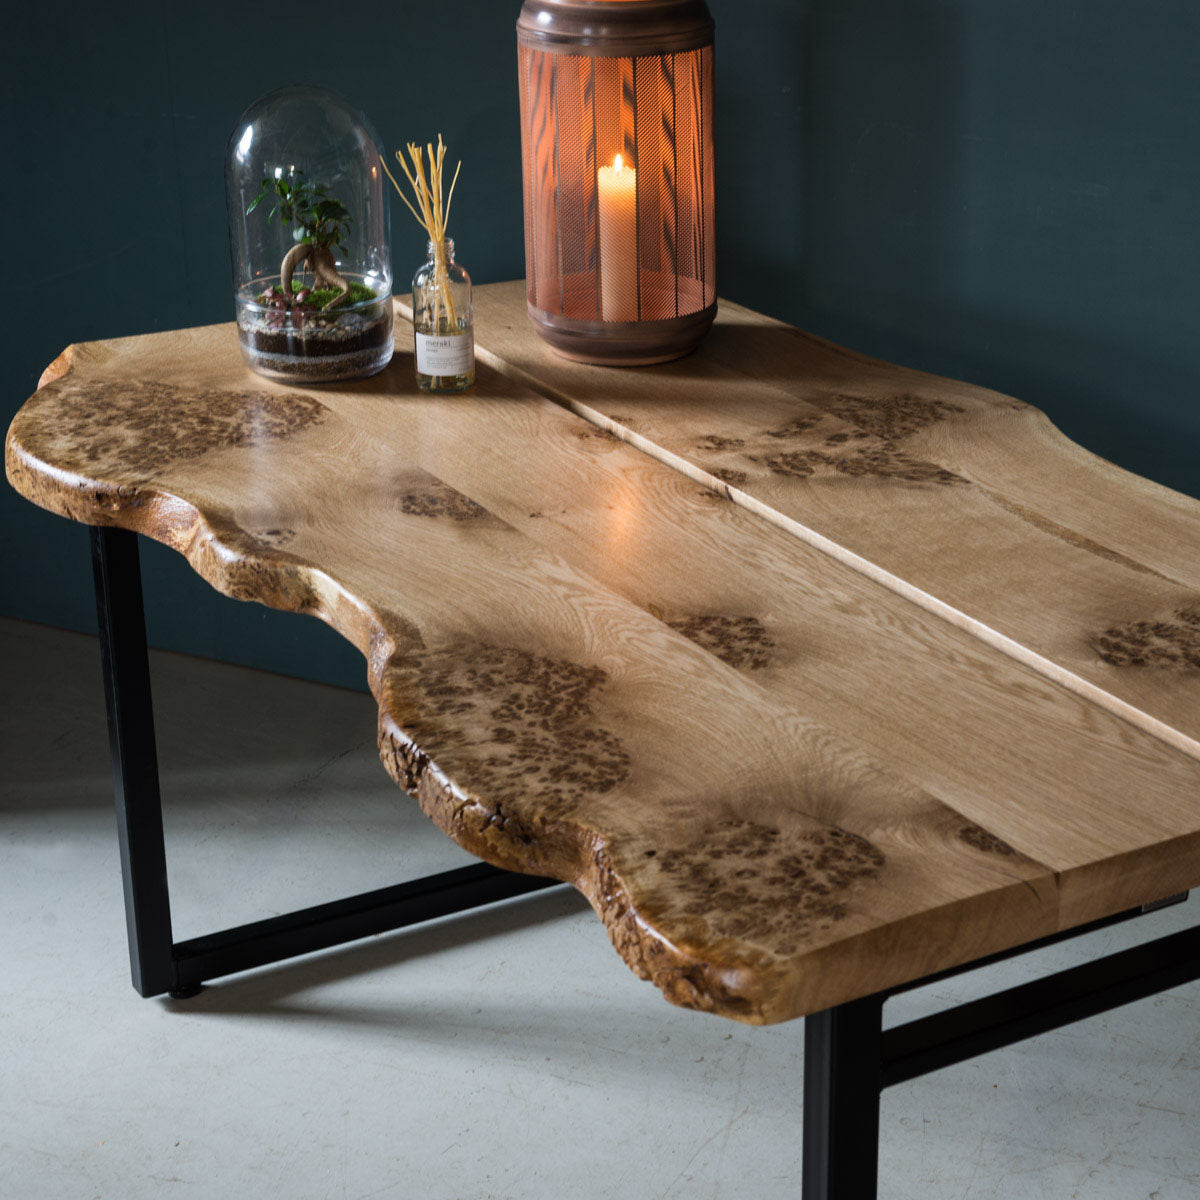 An image of the Live Edge Oak Table, Opia product available from Koda Studios